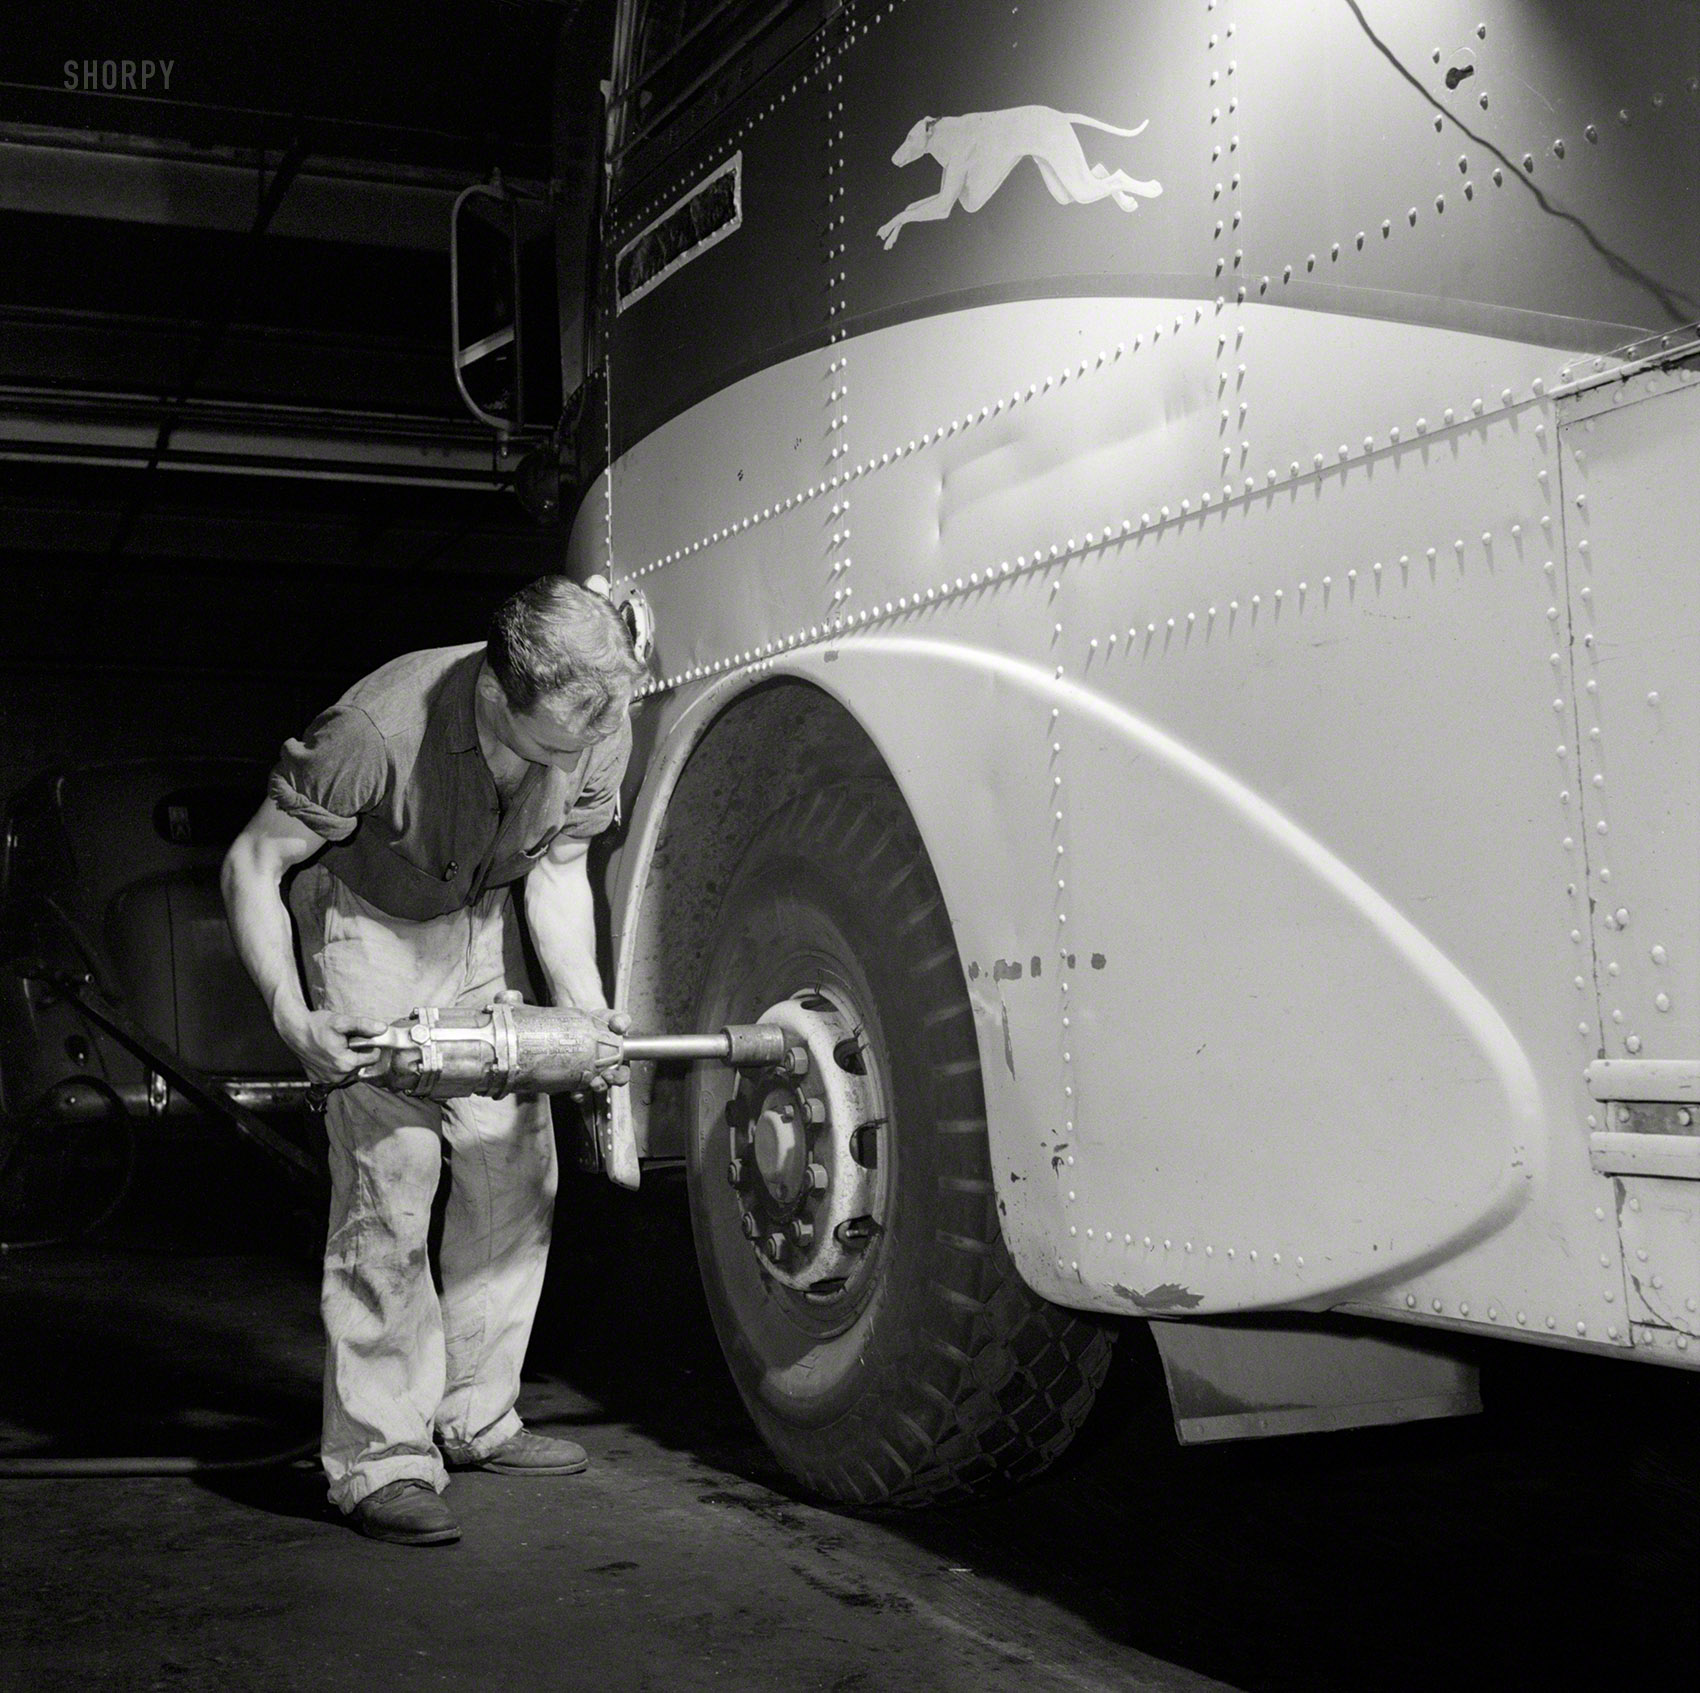 September 1943. "Pittsburgh, Pennsylvania. Removing a tire from a bus at the Greyhound garage." Office of War Information photo by Esther Bubley, that amanuensis of the motorcoach, whose hundreds of bus images rival Jack Delano's train photos in their breadth and number. View full size.